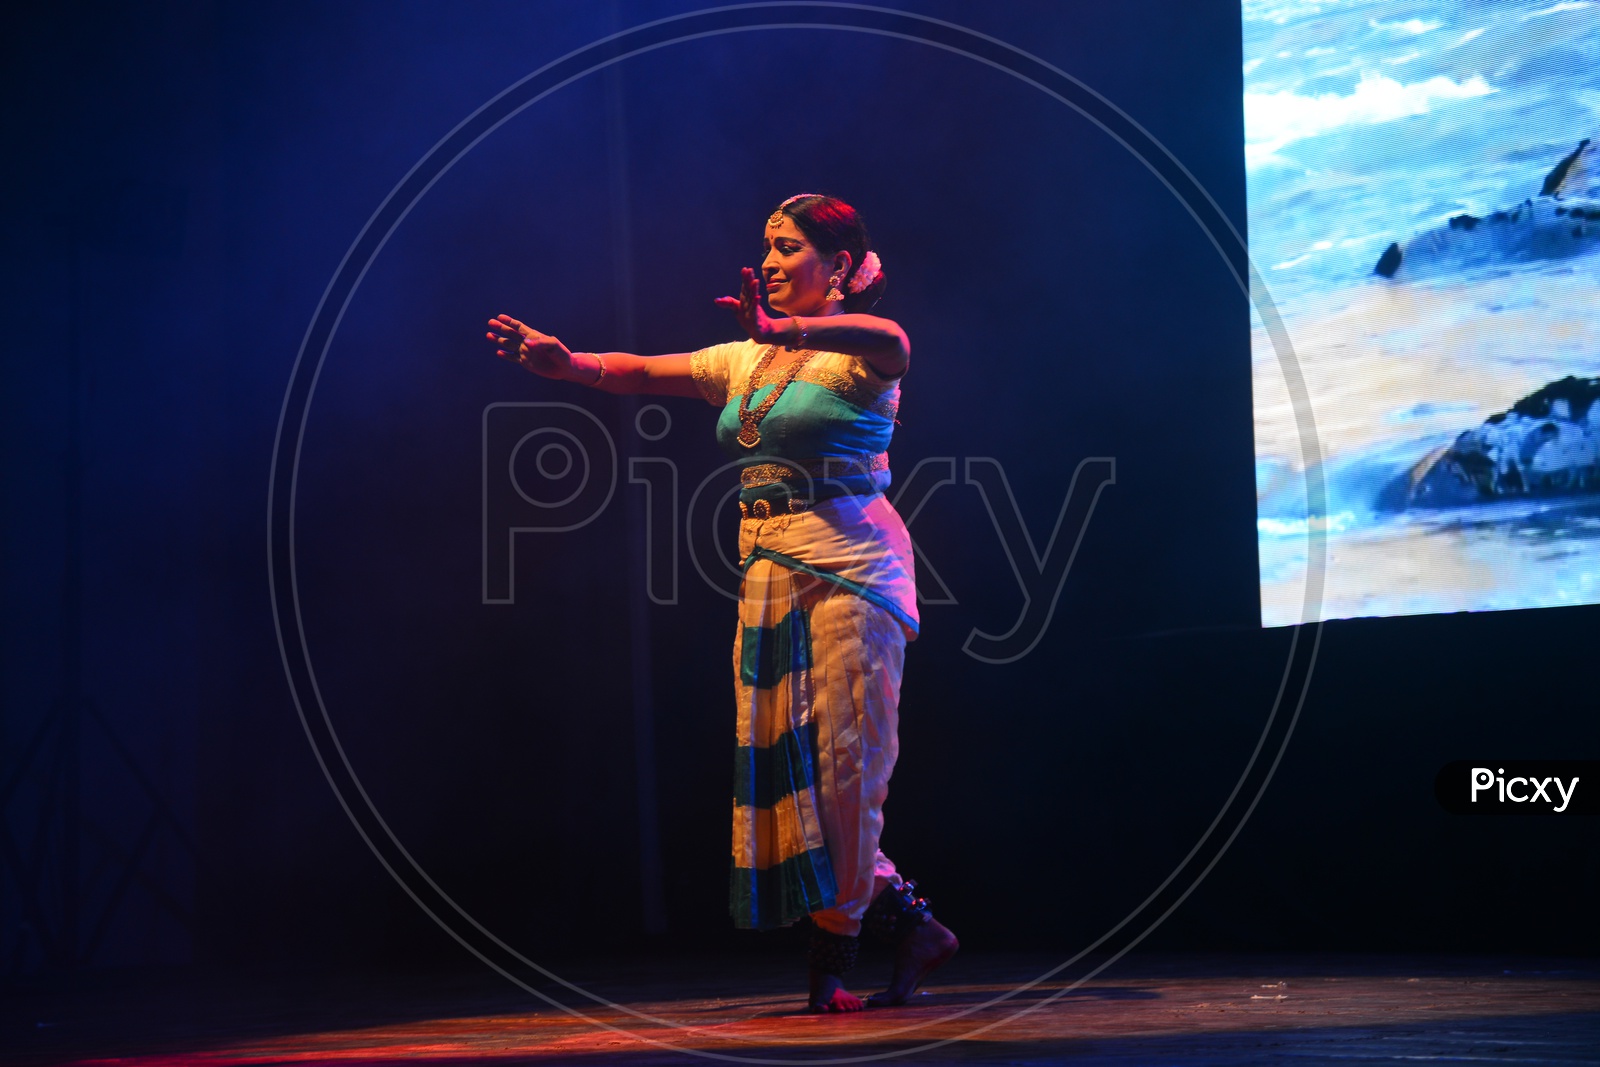 Bharathanatyam , A Classical Dance Art Form Performing On Stage By an Artist